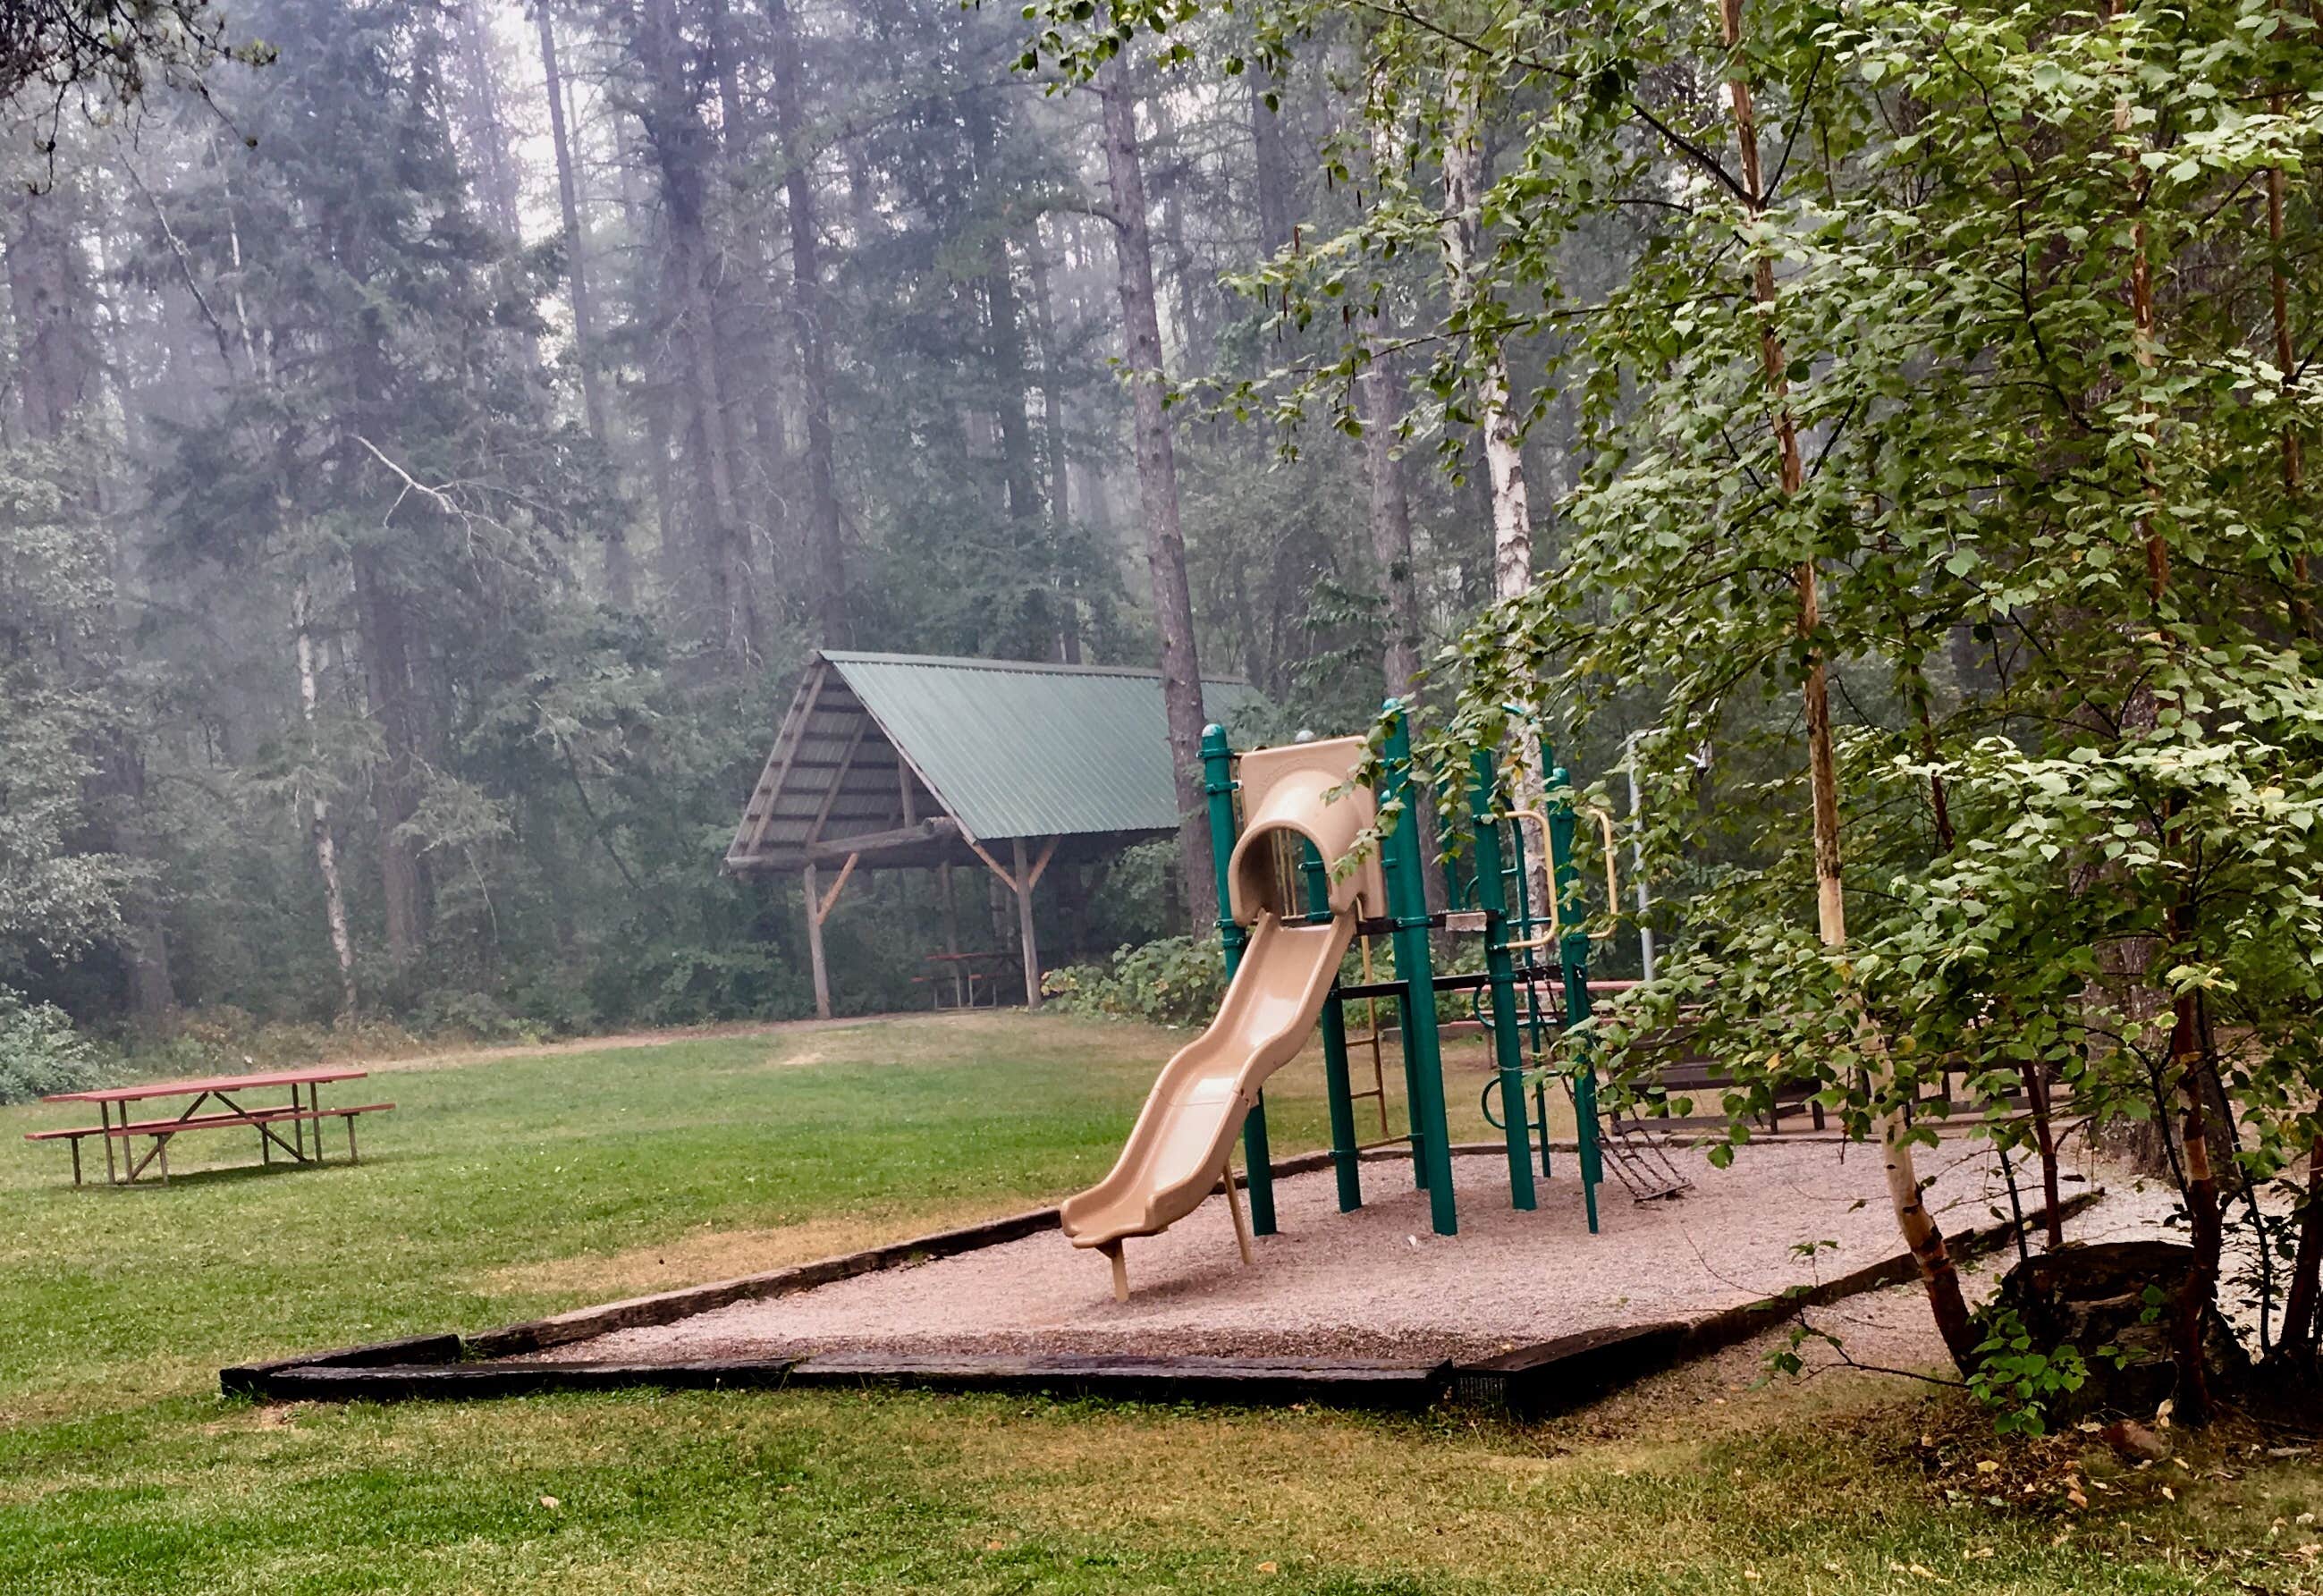 central playground and picnic area